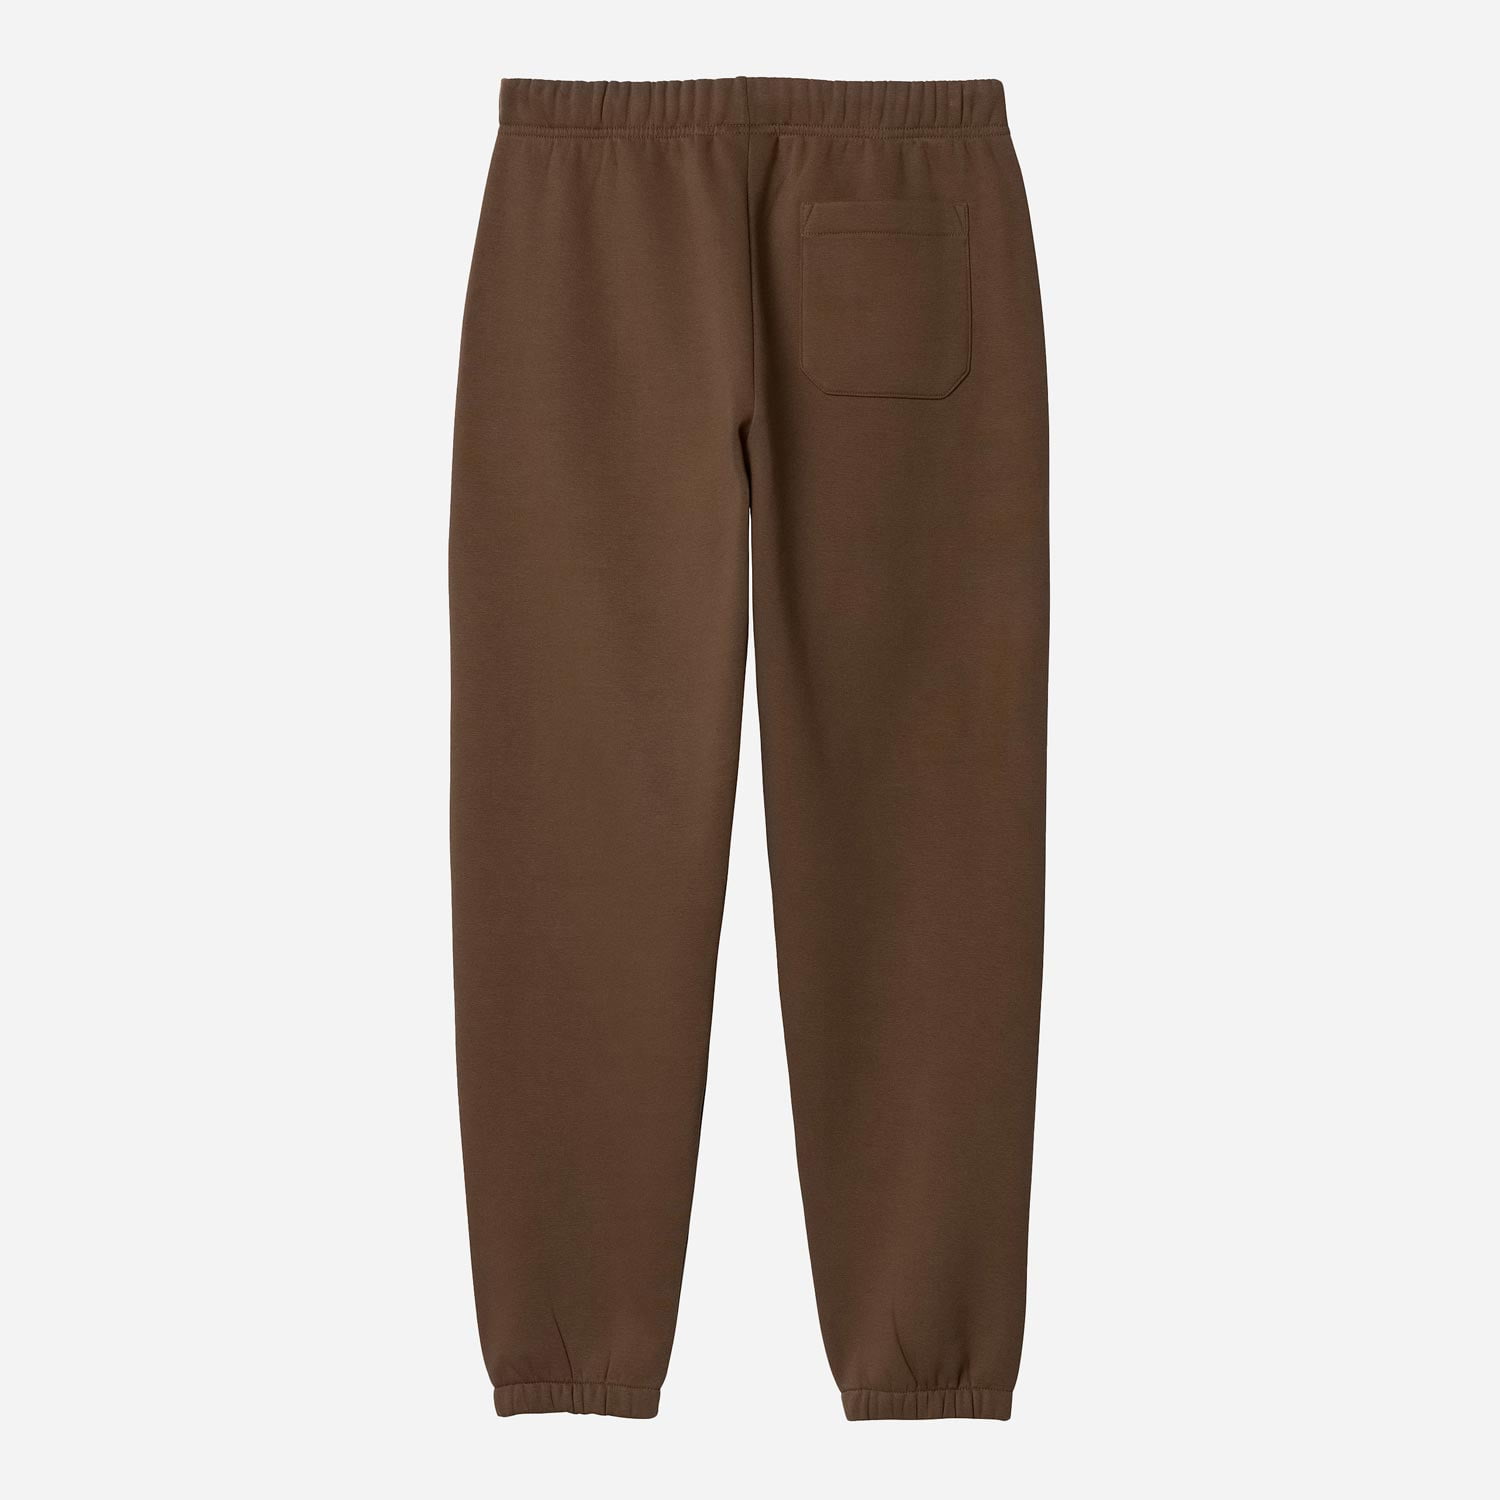 Carhartt WIP Chase Loose Fit Sweat Pant - Tamarind/Gold